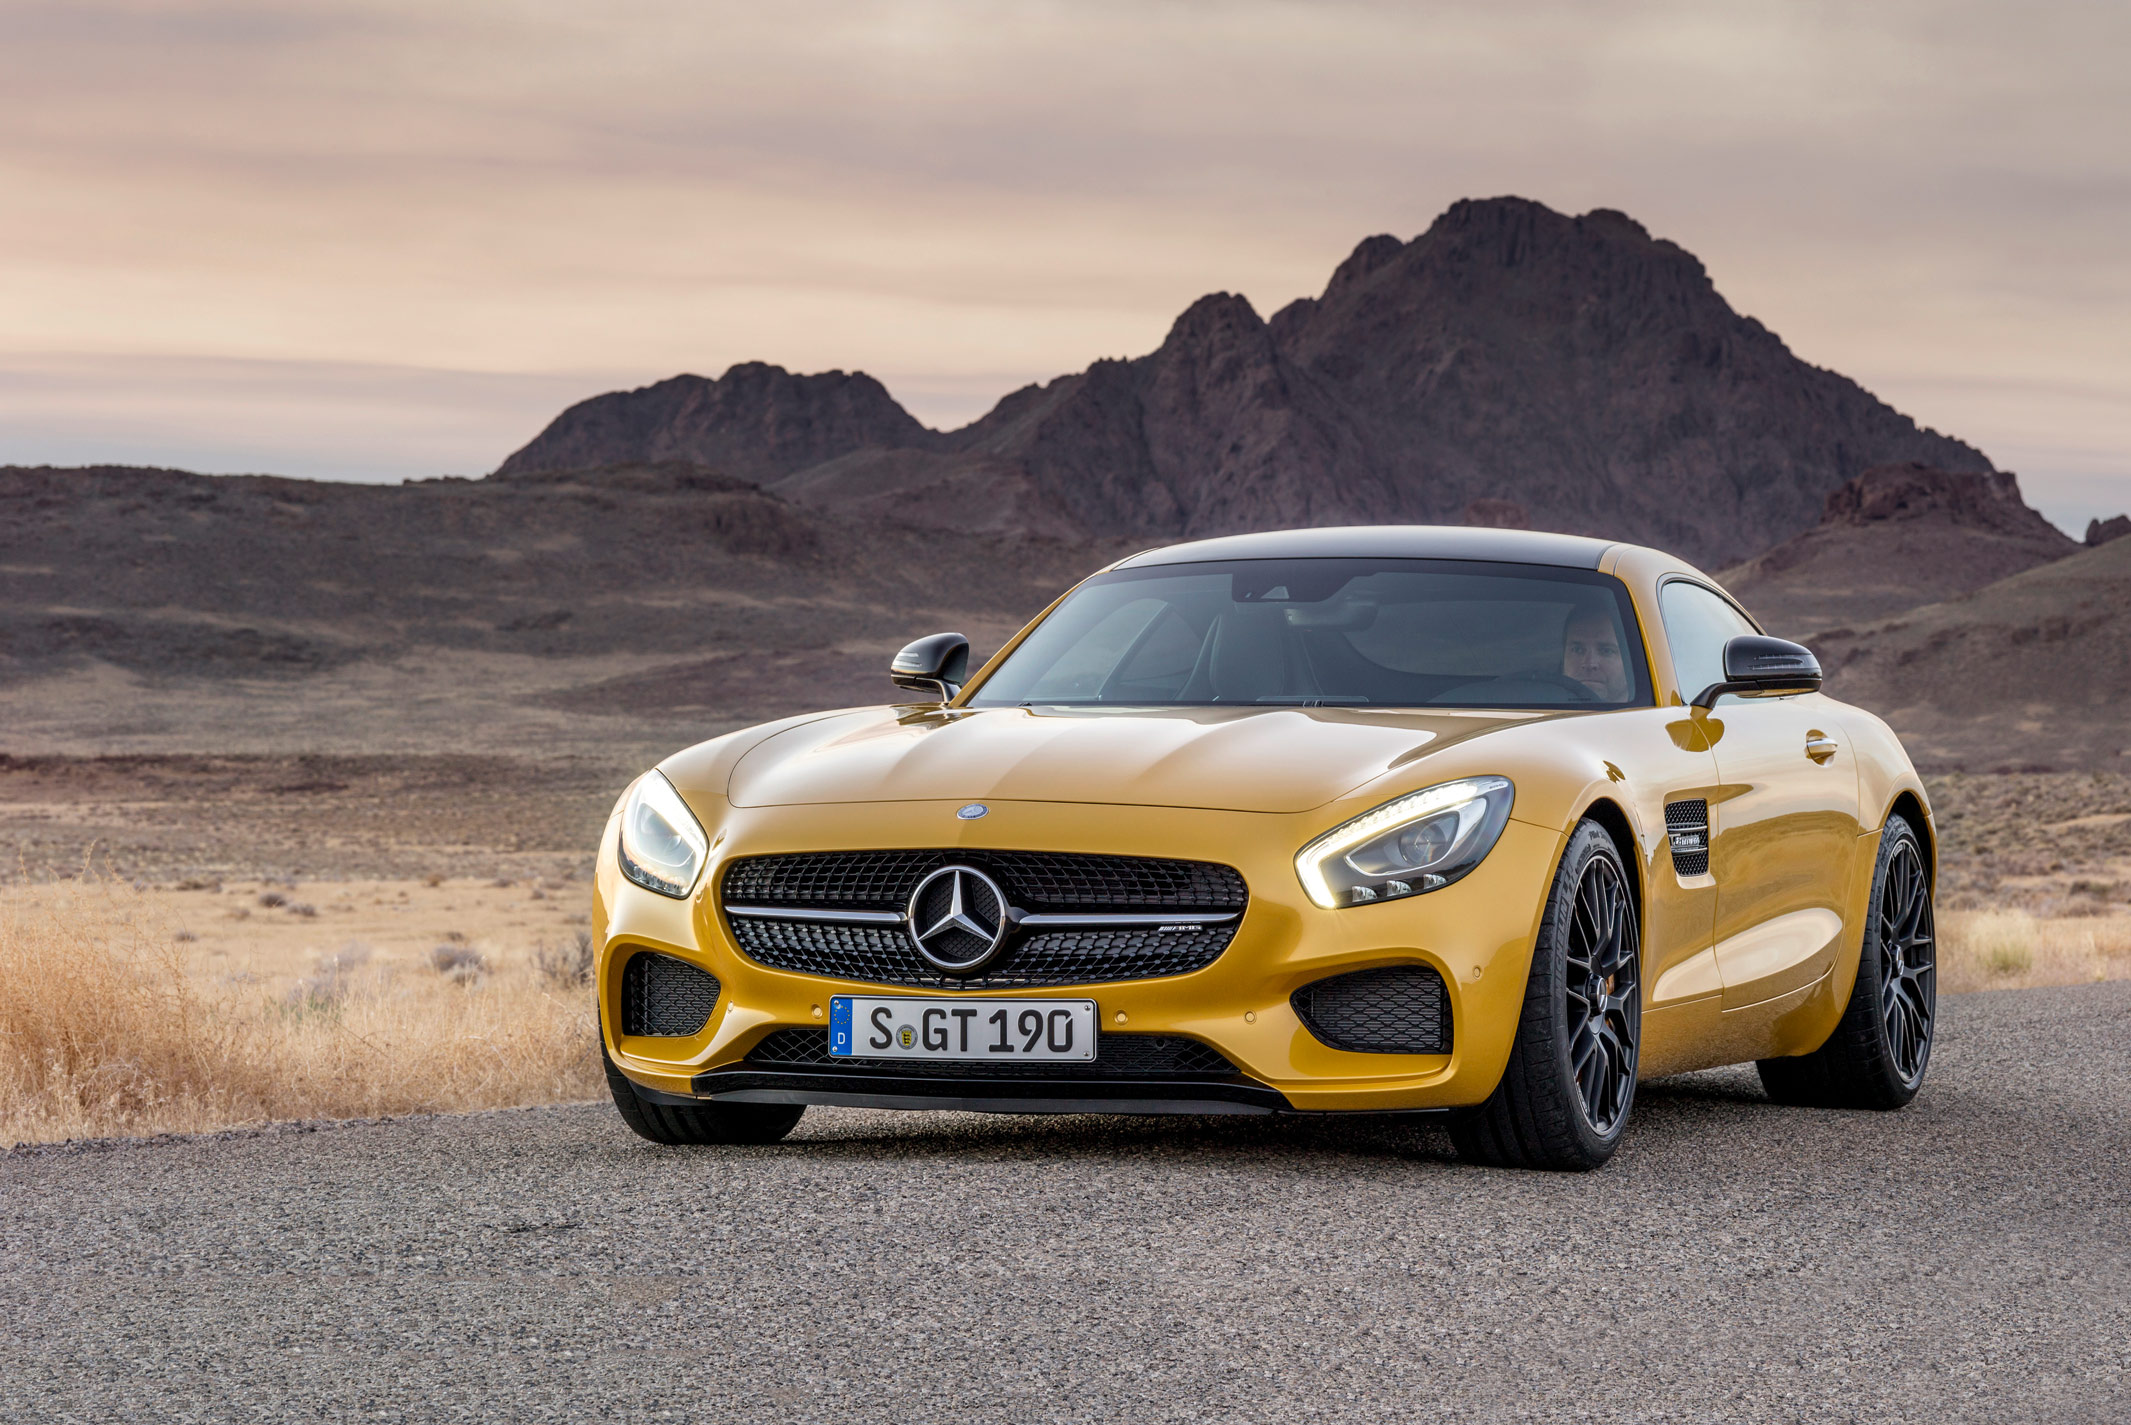 The new Mercedes-AMG GT